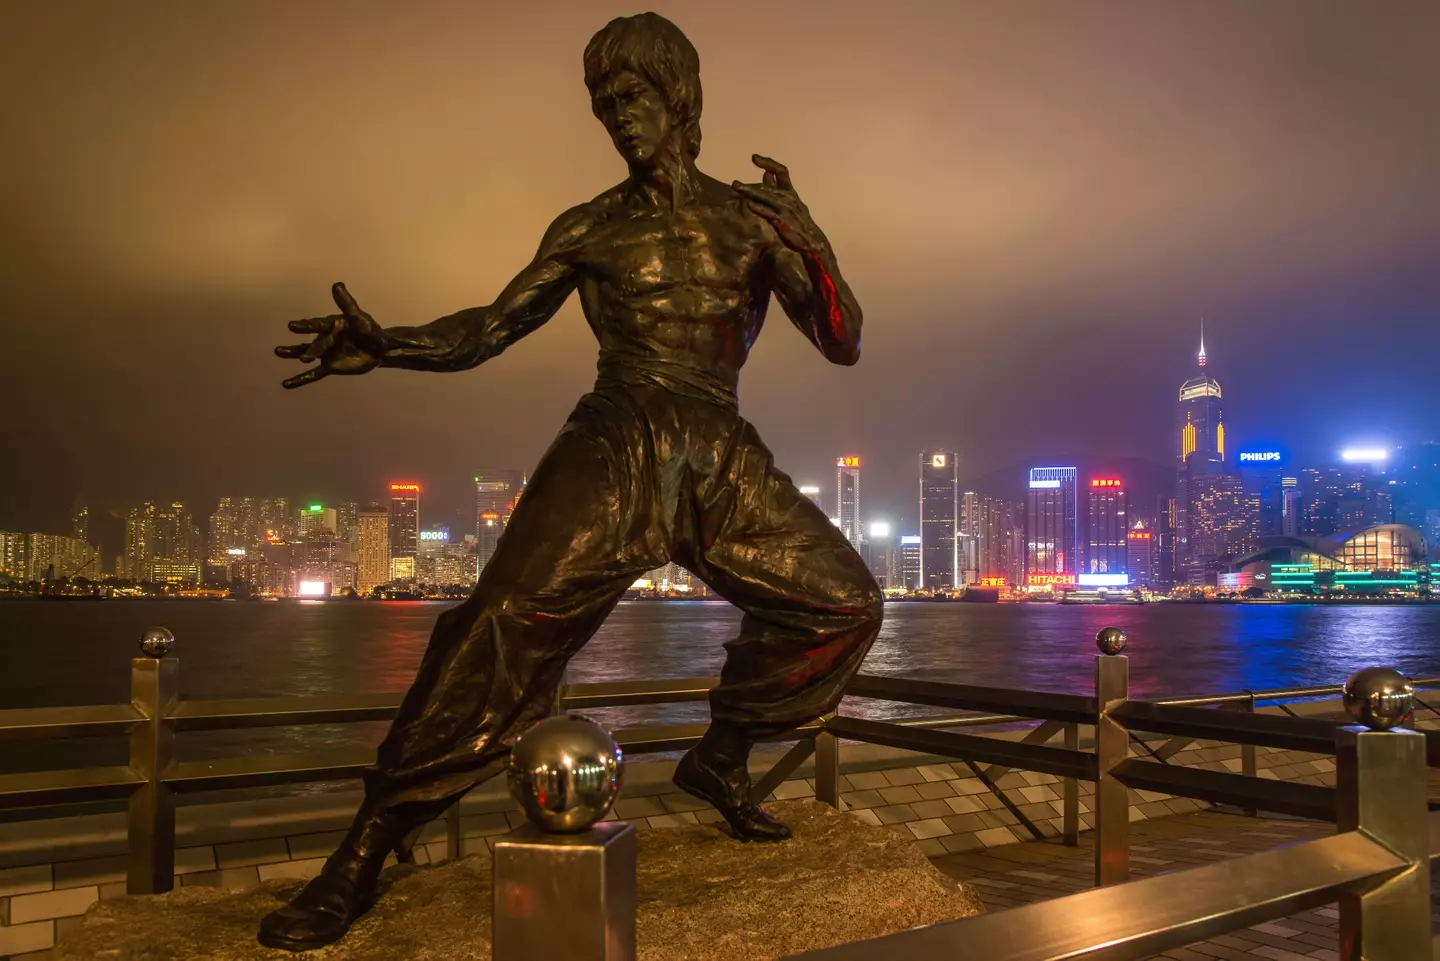 Lee is now considered an icon of martial arts all over the world.